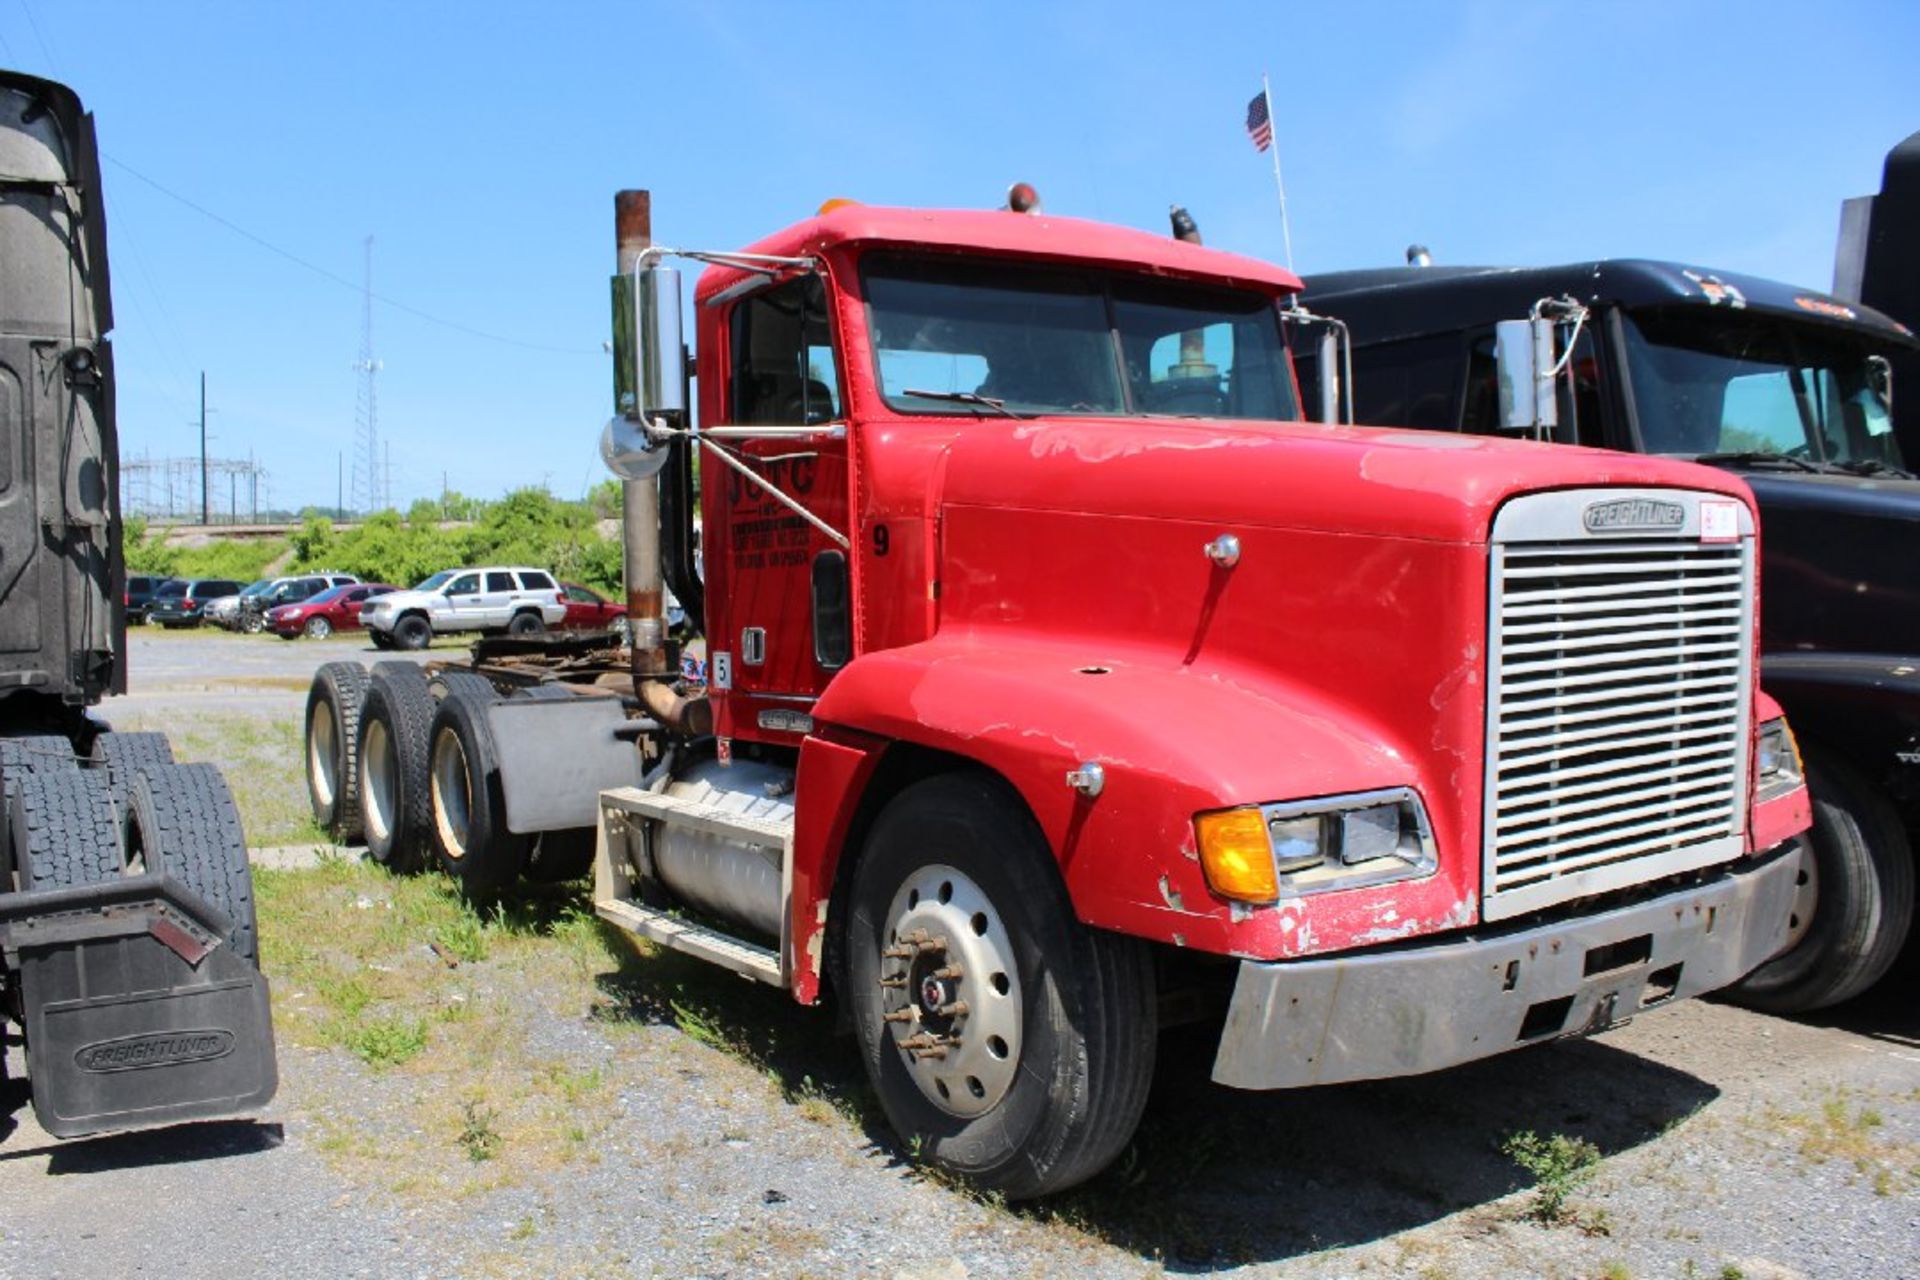 1995 Freightliner Day Cab Road Tractor, Tandem Axle with Bogies, CAT 3406 Diesel, 10 Speed, 236, - Image 2 of 5